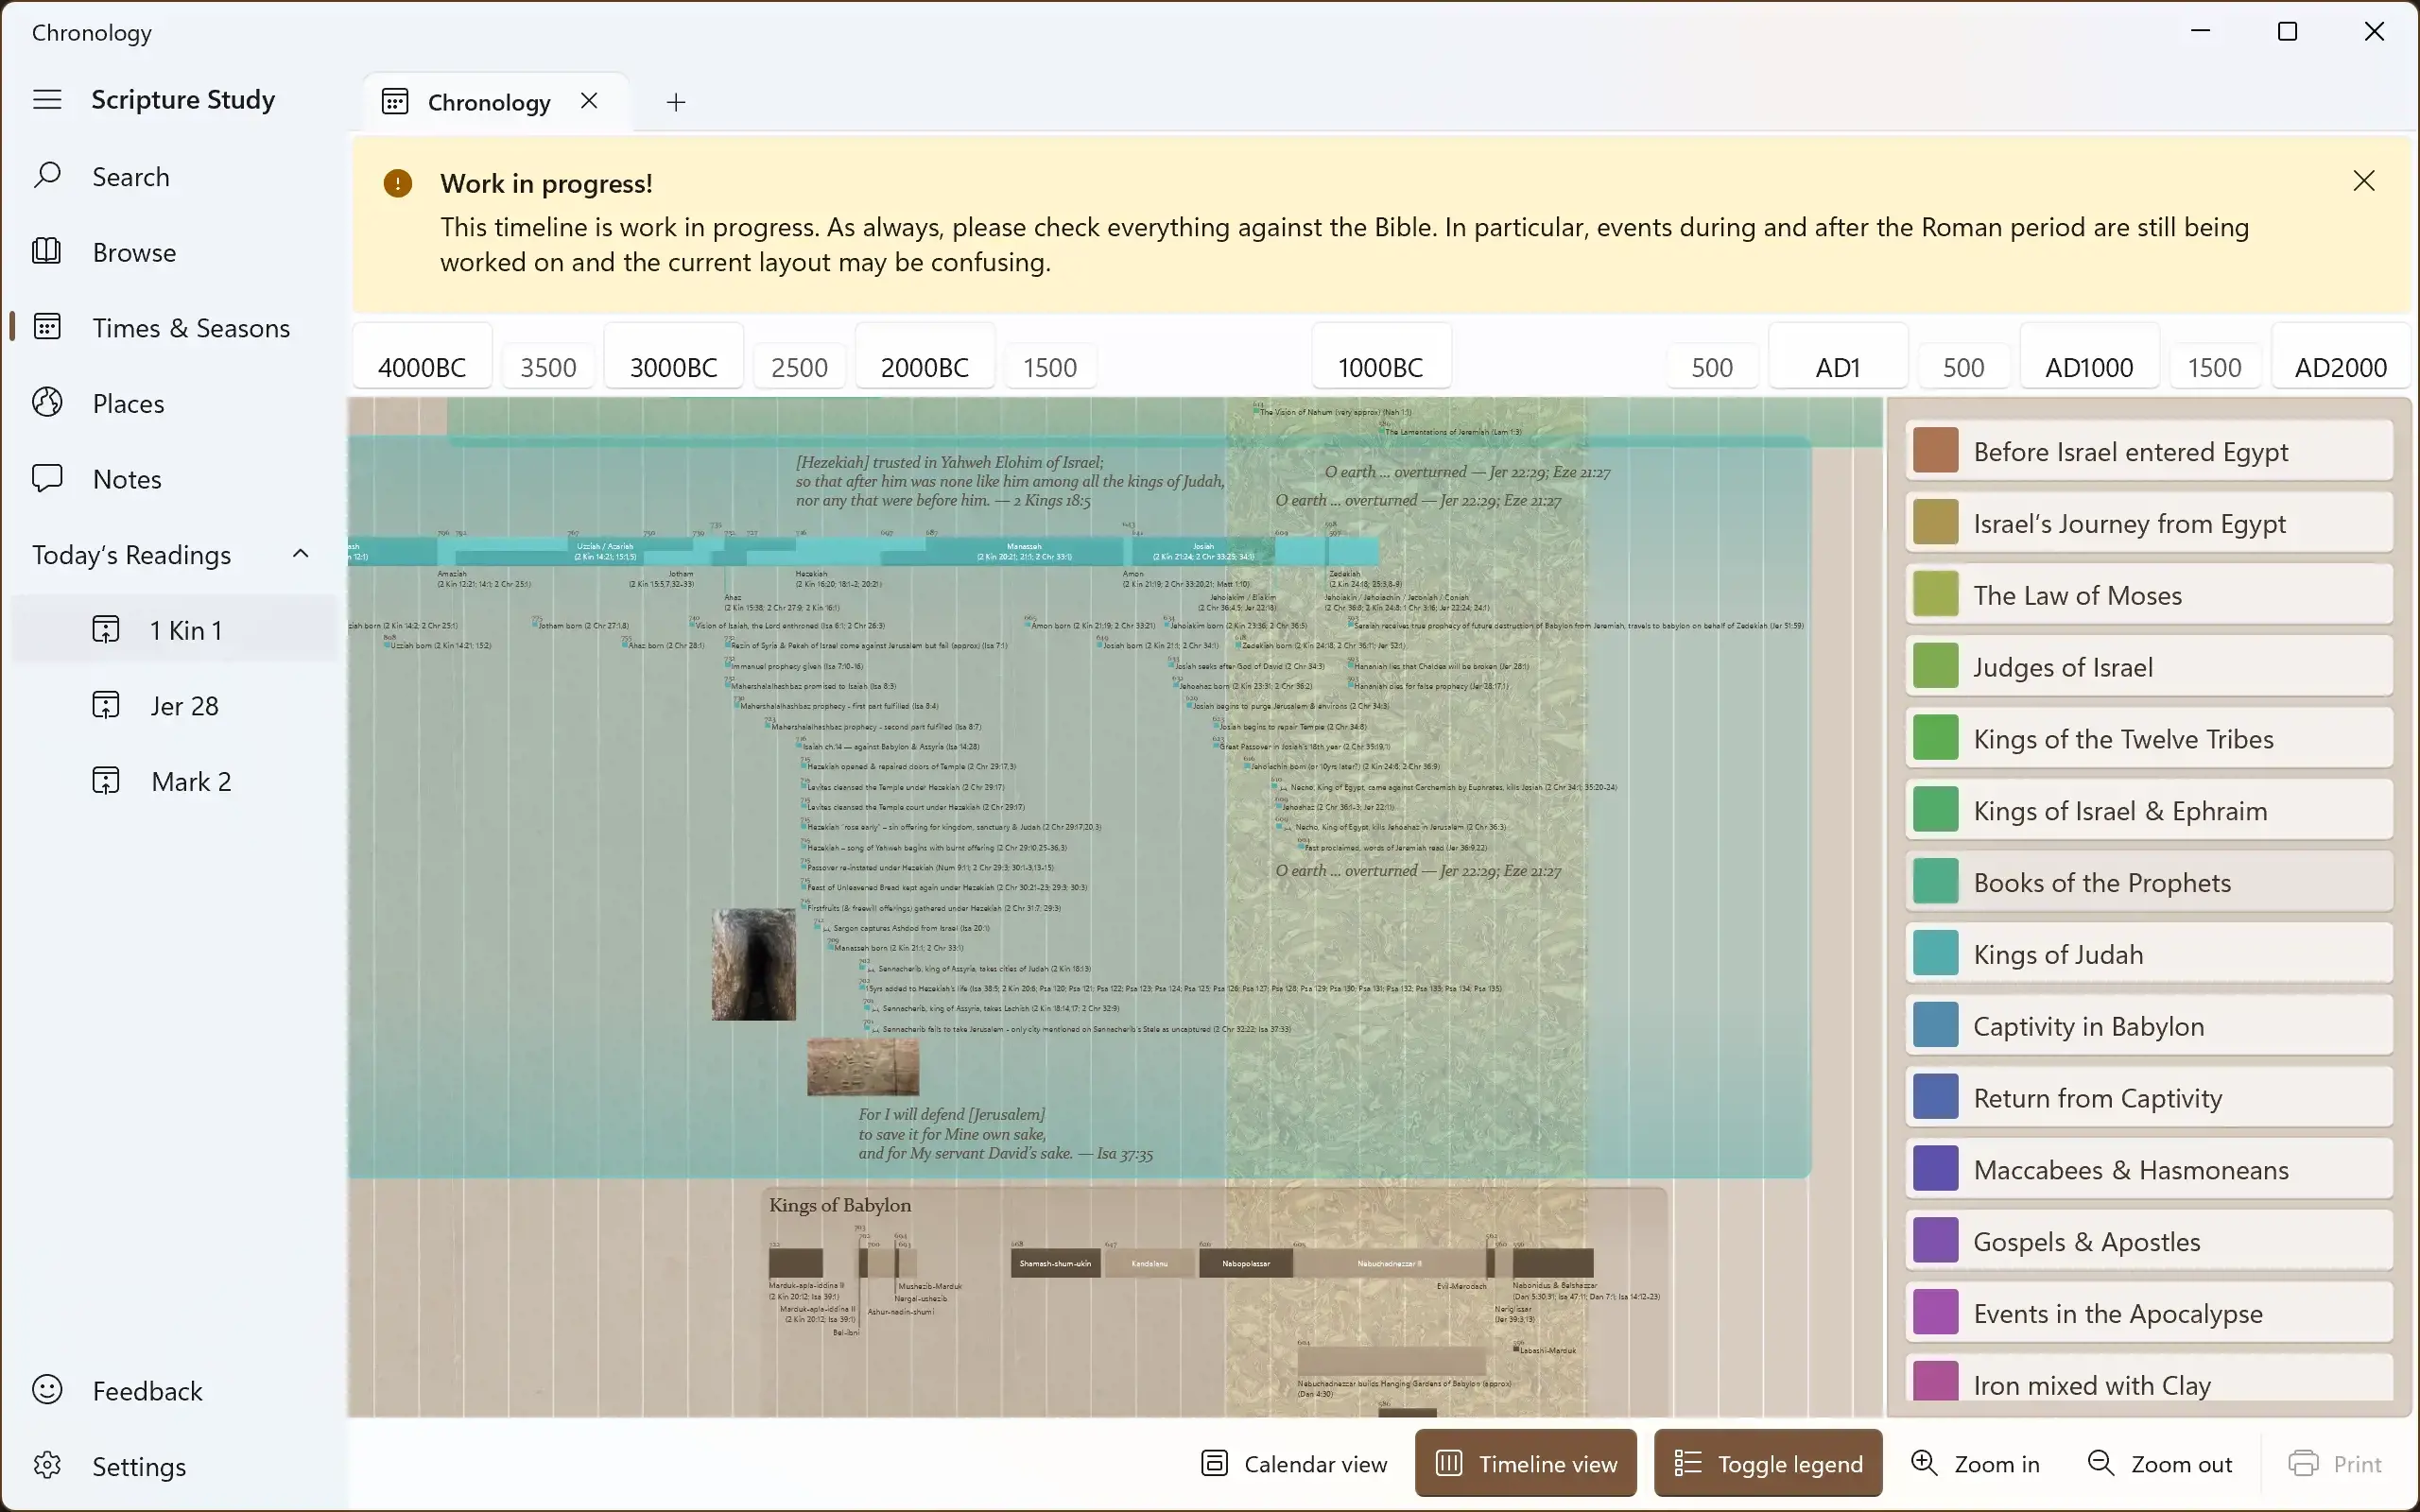 Screenshot showing part of the Timeline view of events in the Bible